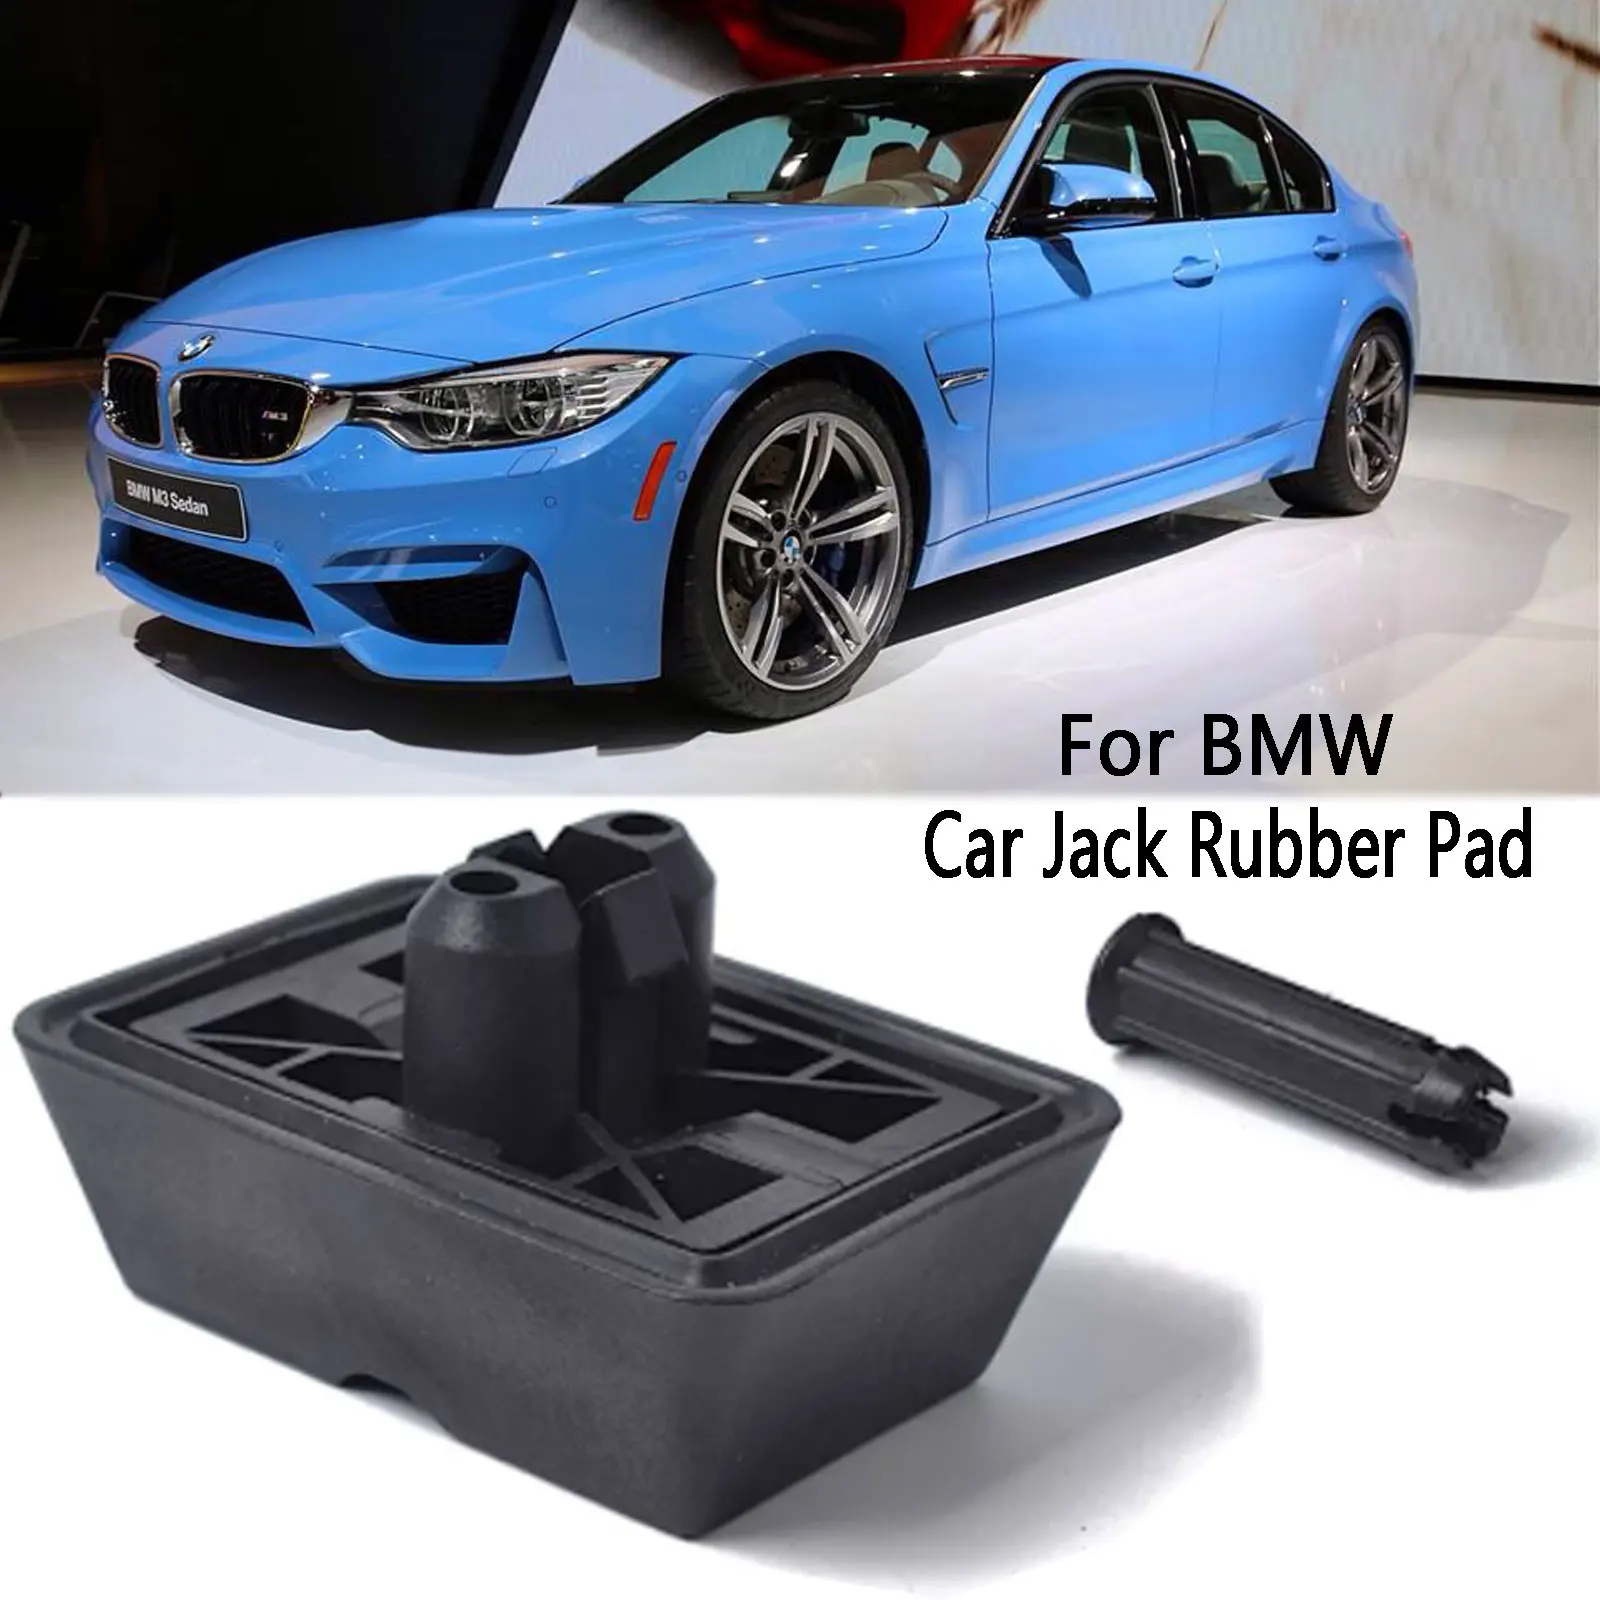 

Jacks Pad Under Car Support Pad Cover For BMW E46 E63 E64 E65 E66 E67 E83 E85 E86 X5 E89 E52 51718268885 Car Jack Lift Pad Puck